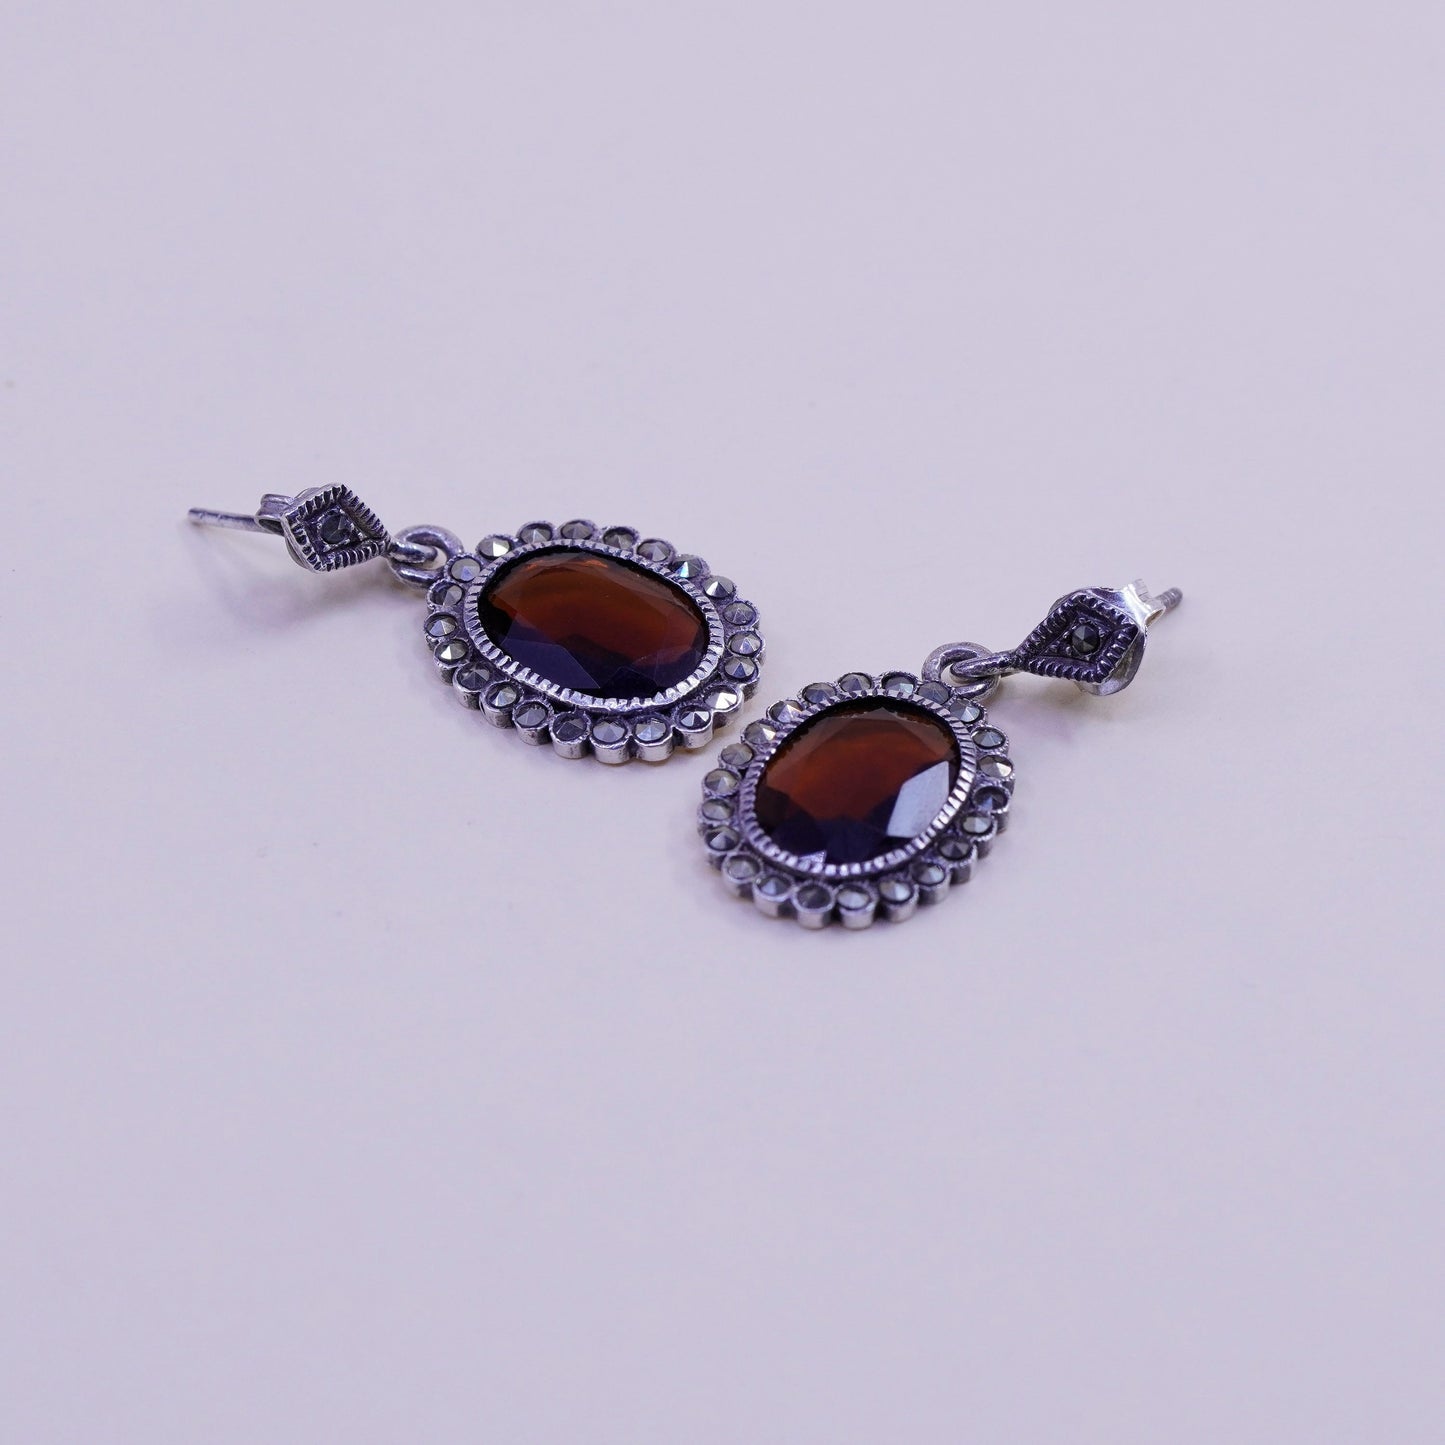 Vintage sterling 925 silver handmade earrings with ruby and Marcasite